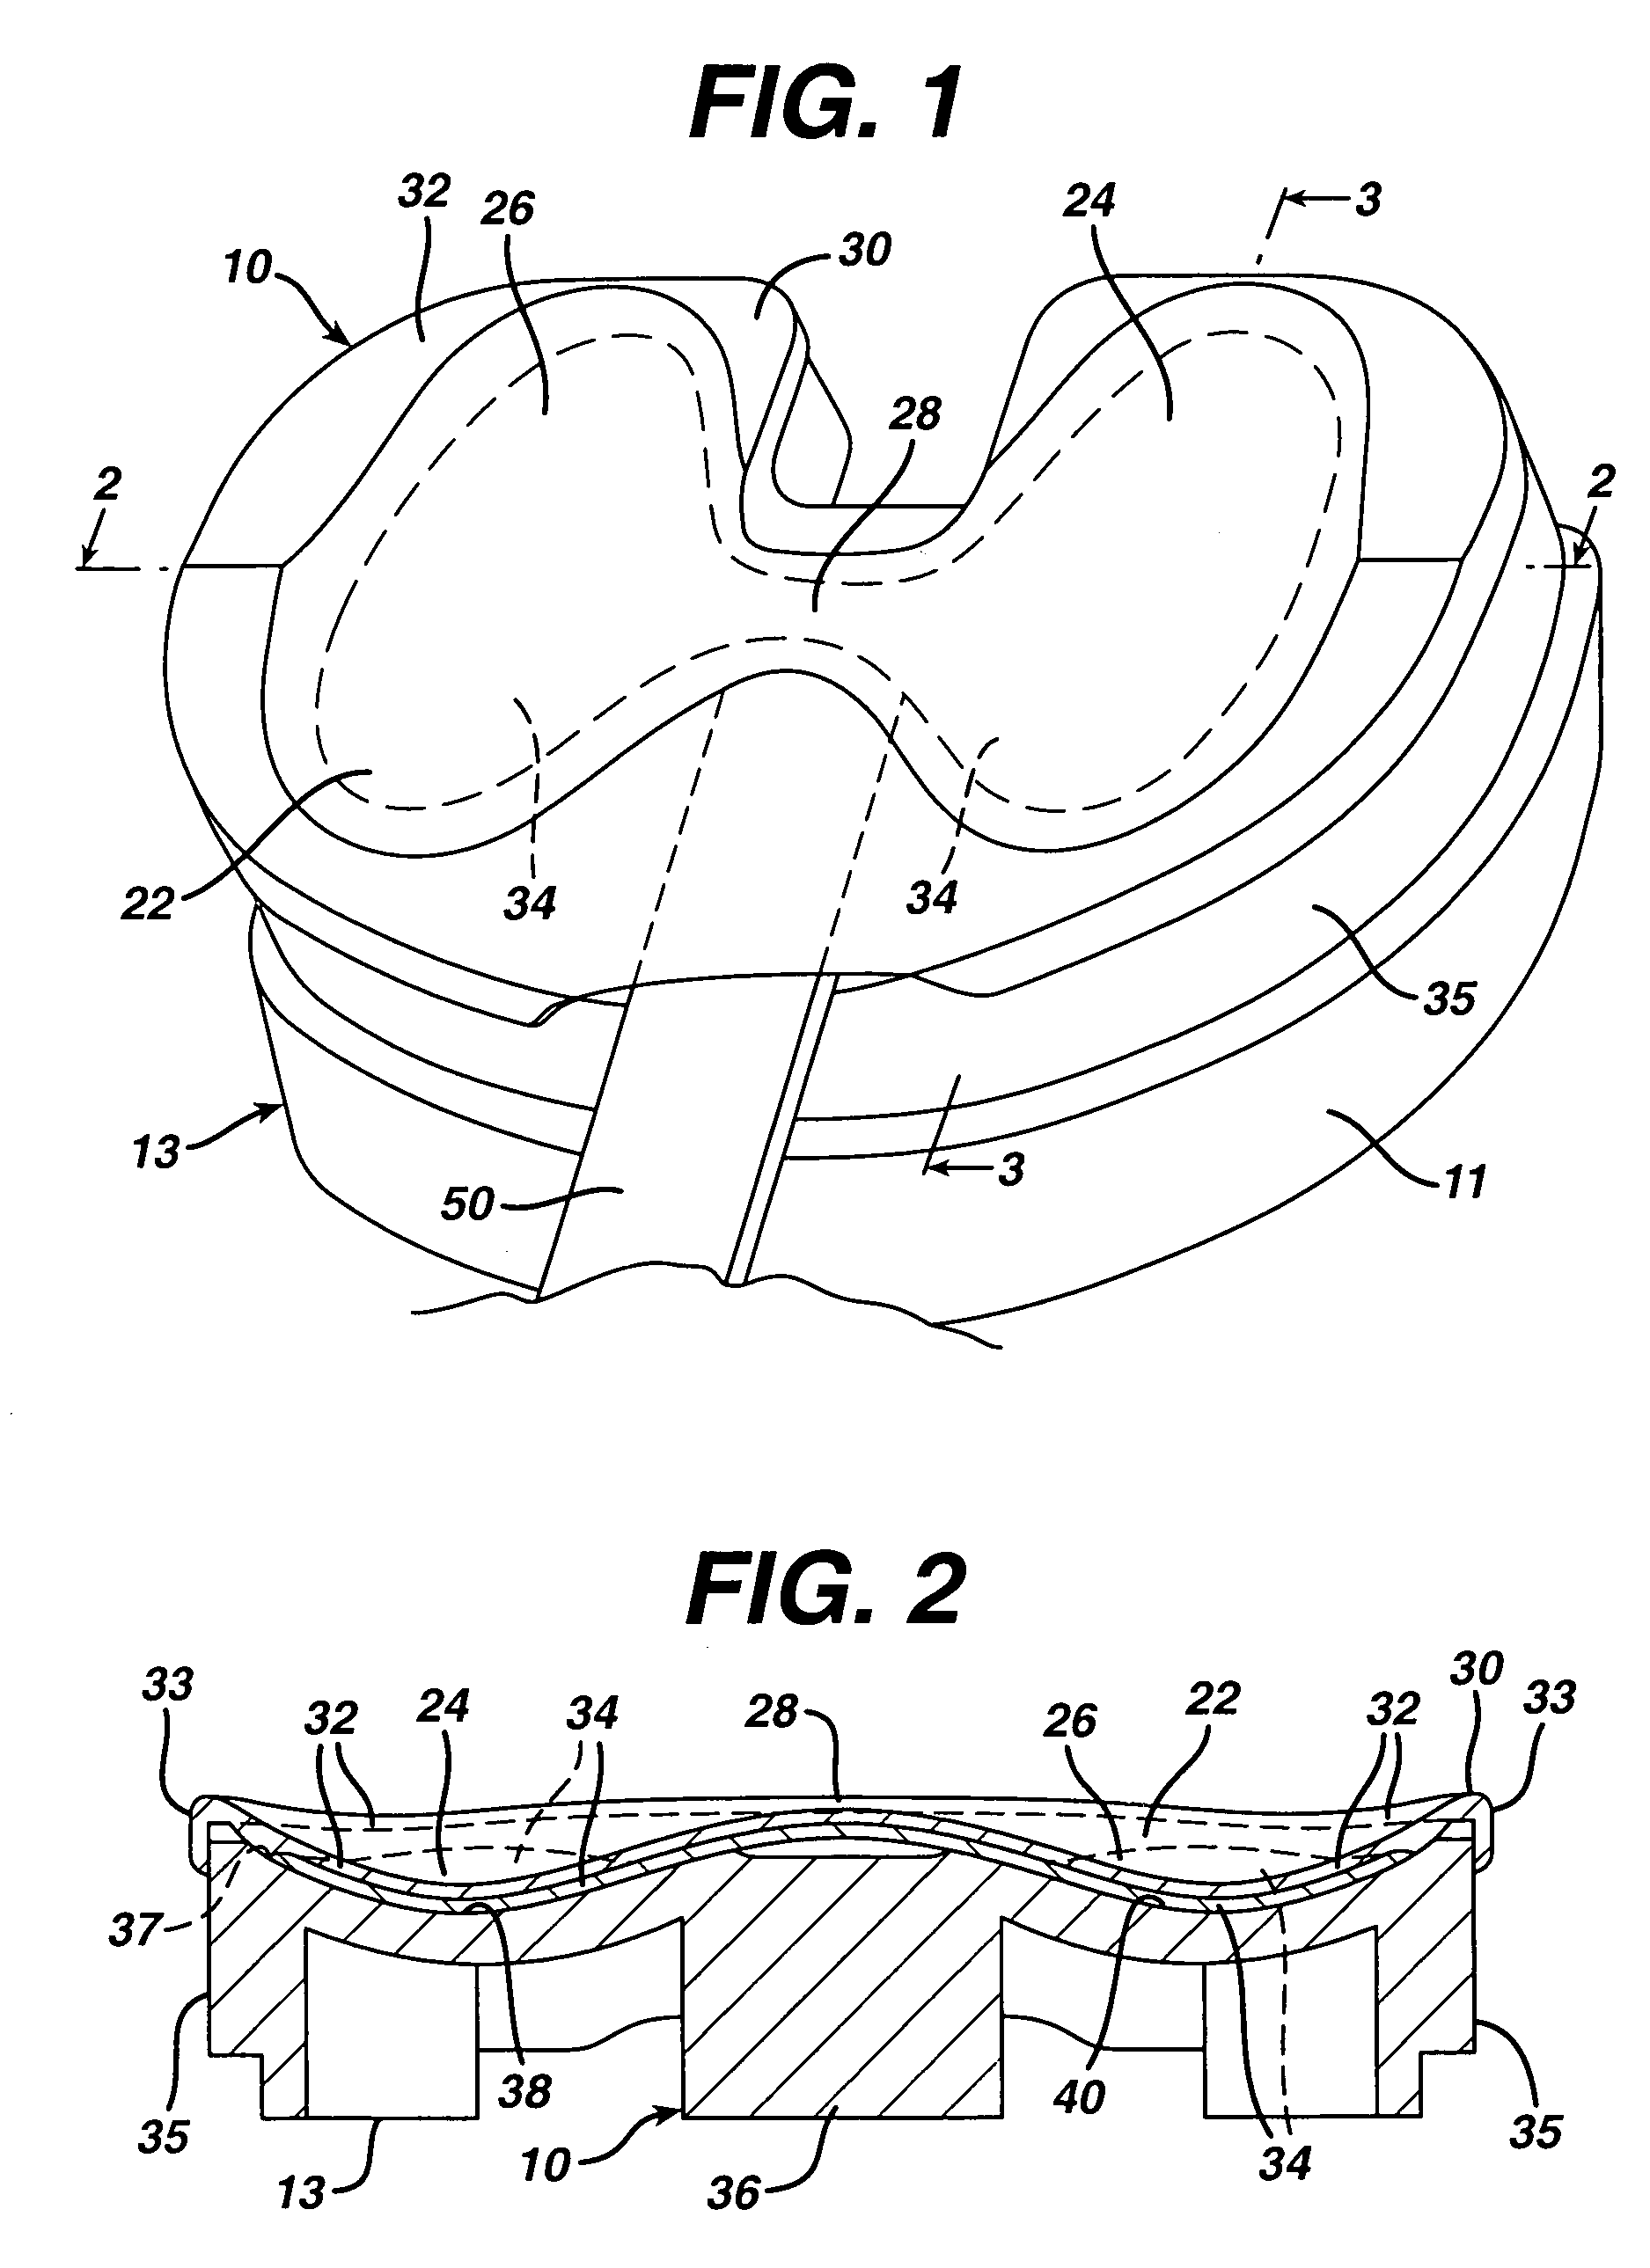 Apparatus, system and method for intraoperative performance analysis during joint arthroplasty